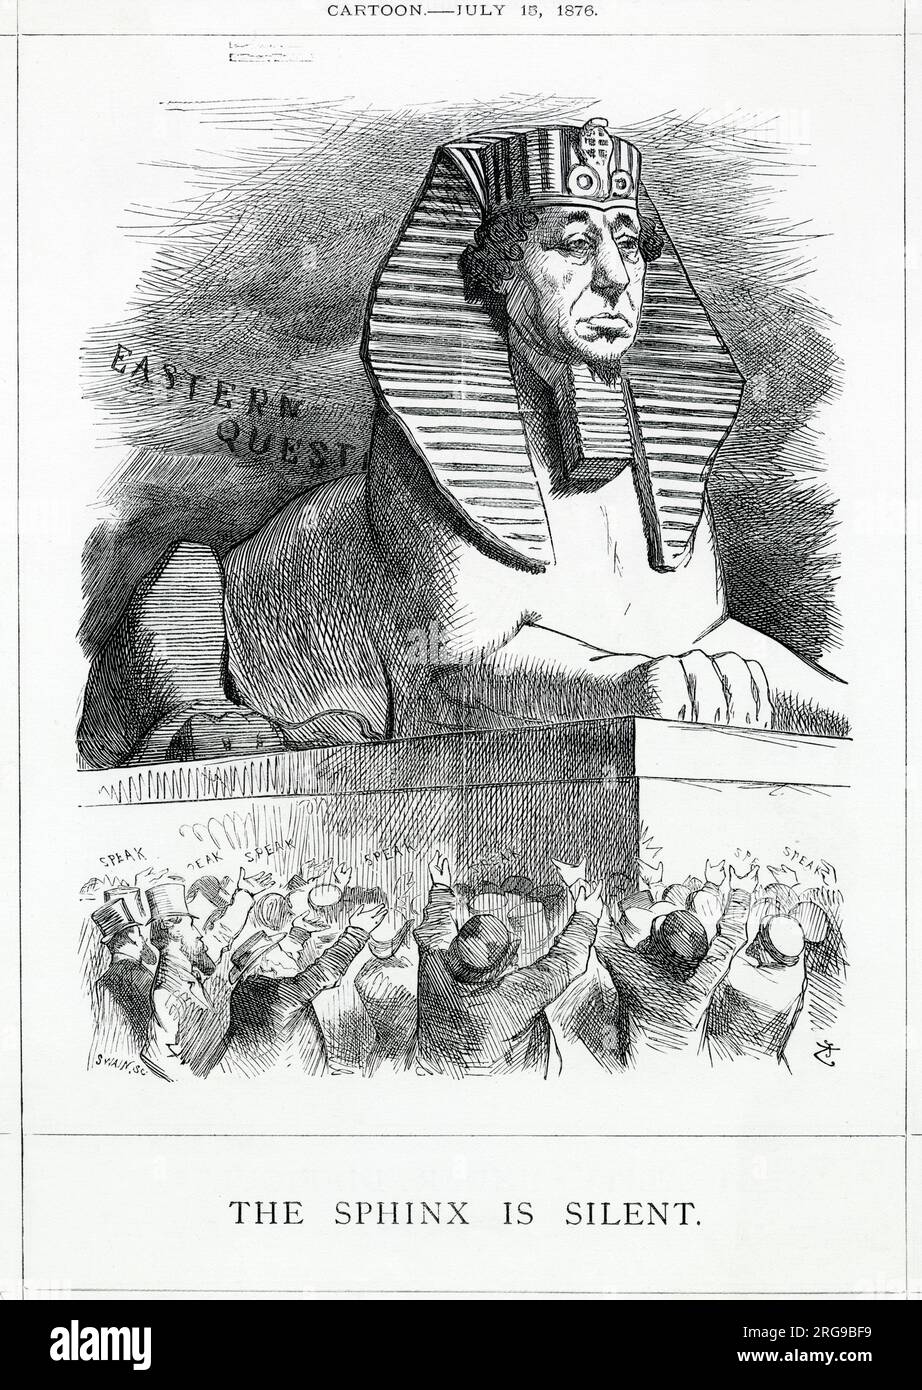 Cartoon, The Sphinx is Silent -- Benjamin Disraeli, Conservative Prime Minister, depicted as the Sphinx, with people below begging him to speak. A satirical reference to his purchase of Suez Canal Shares, and also to his silence about government policy on the Eastern Question, since Serbia and Montenegro had declared war against Turkey. Stock Photo